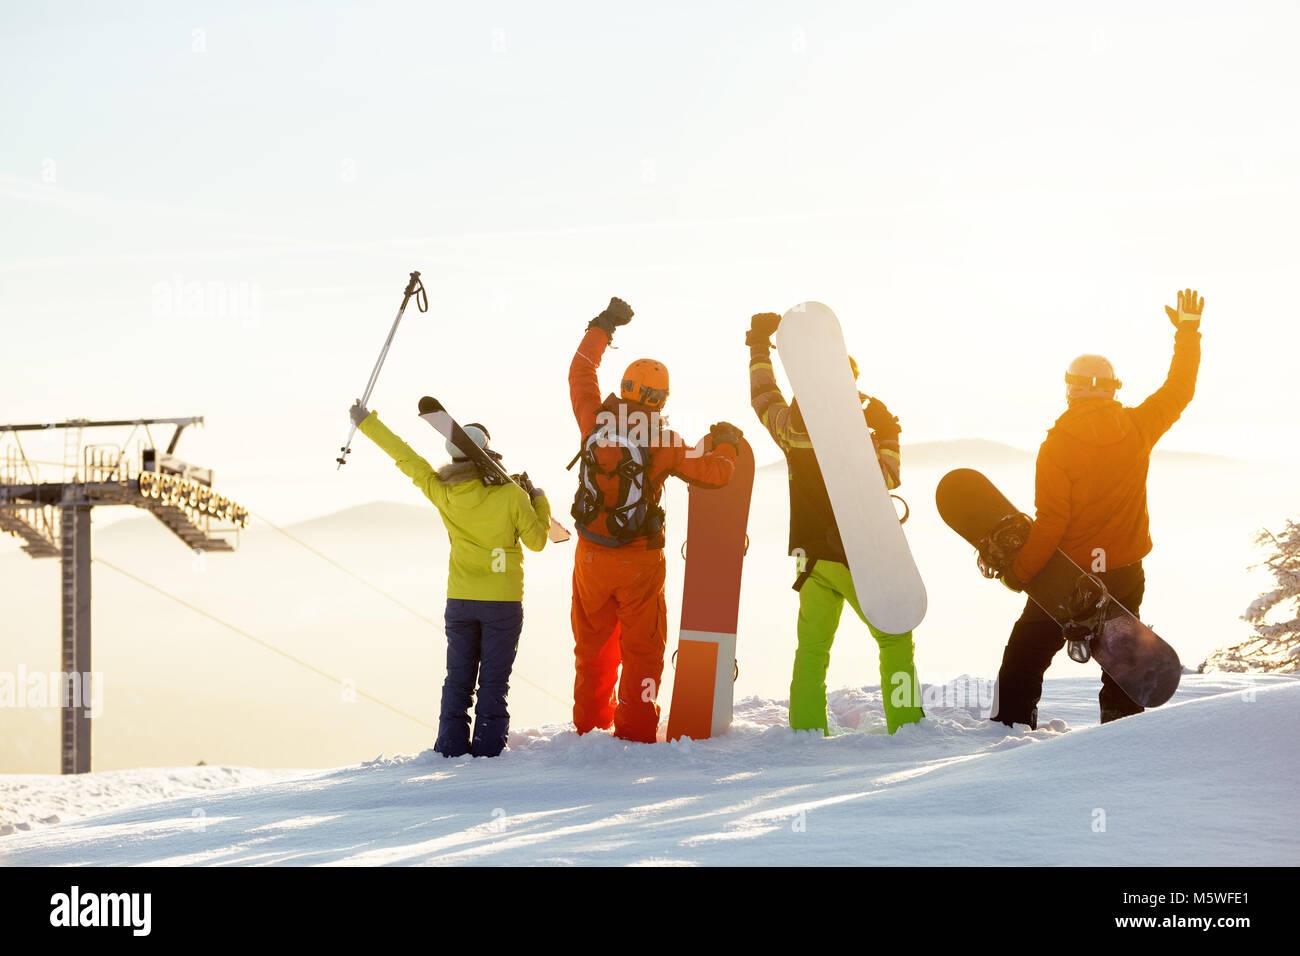 Group of happy skiers and snowboarders having fun Stock Photo